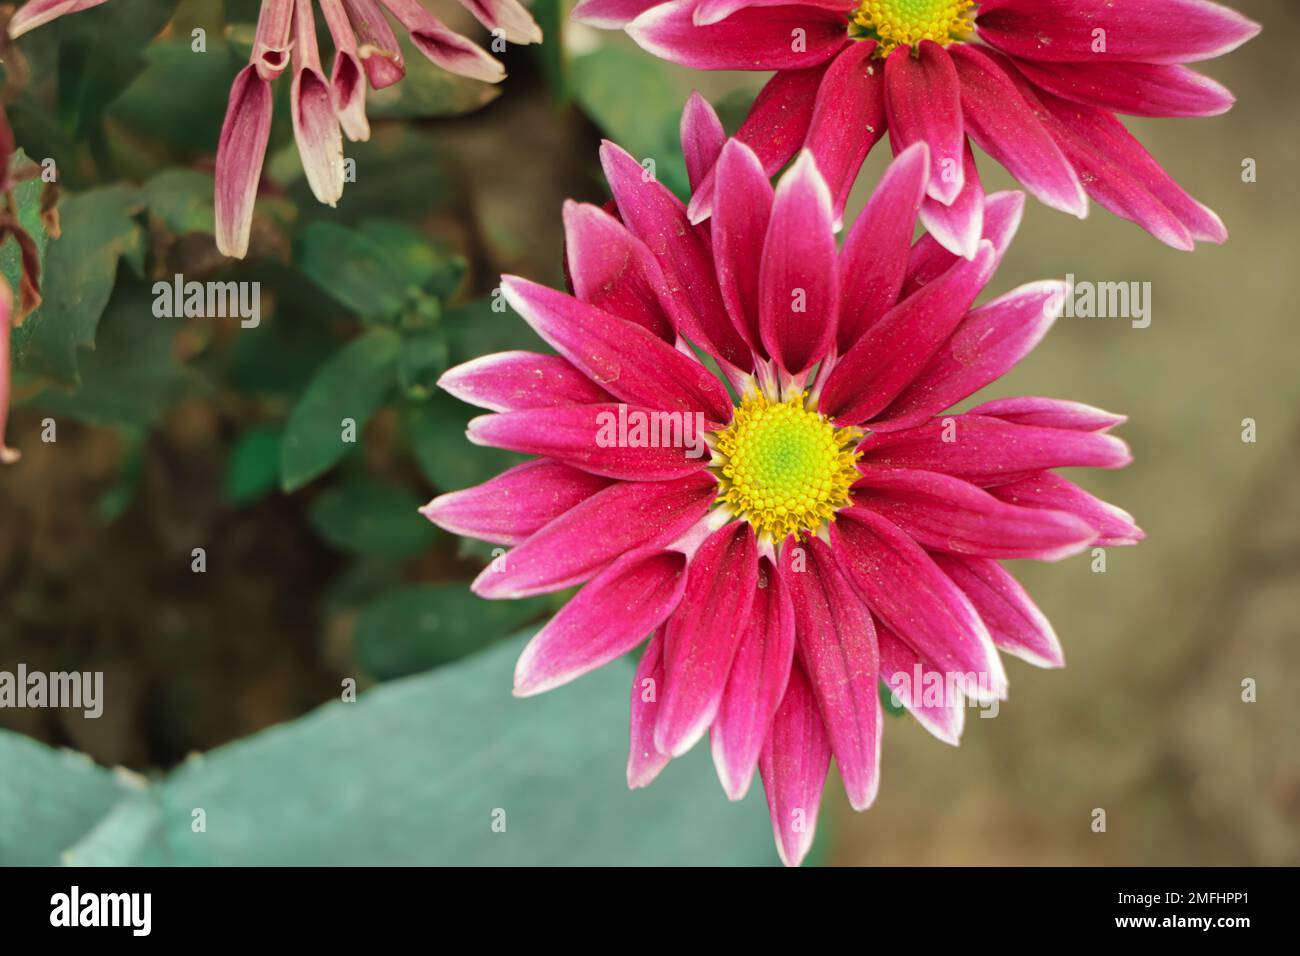 Purple chrysanthemums on a blurry background close-up. Beautiful bright chrysanthemums bloom in autumn in the garden. Chrysanthemum background with a Stock Photo